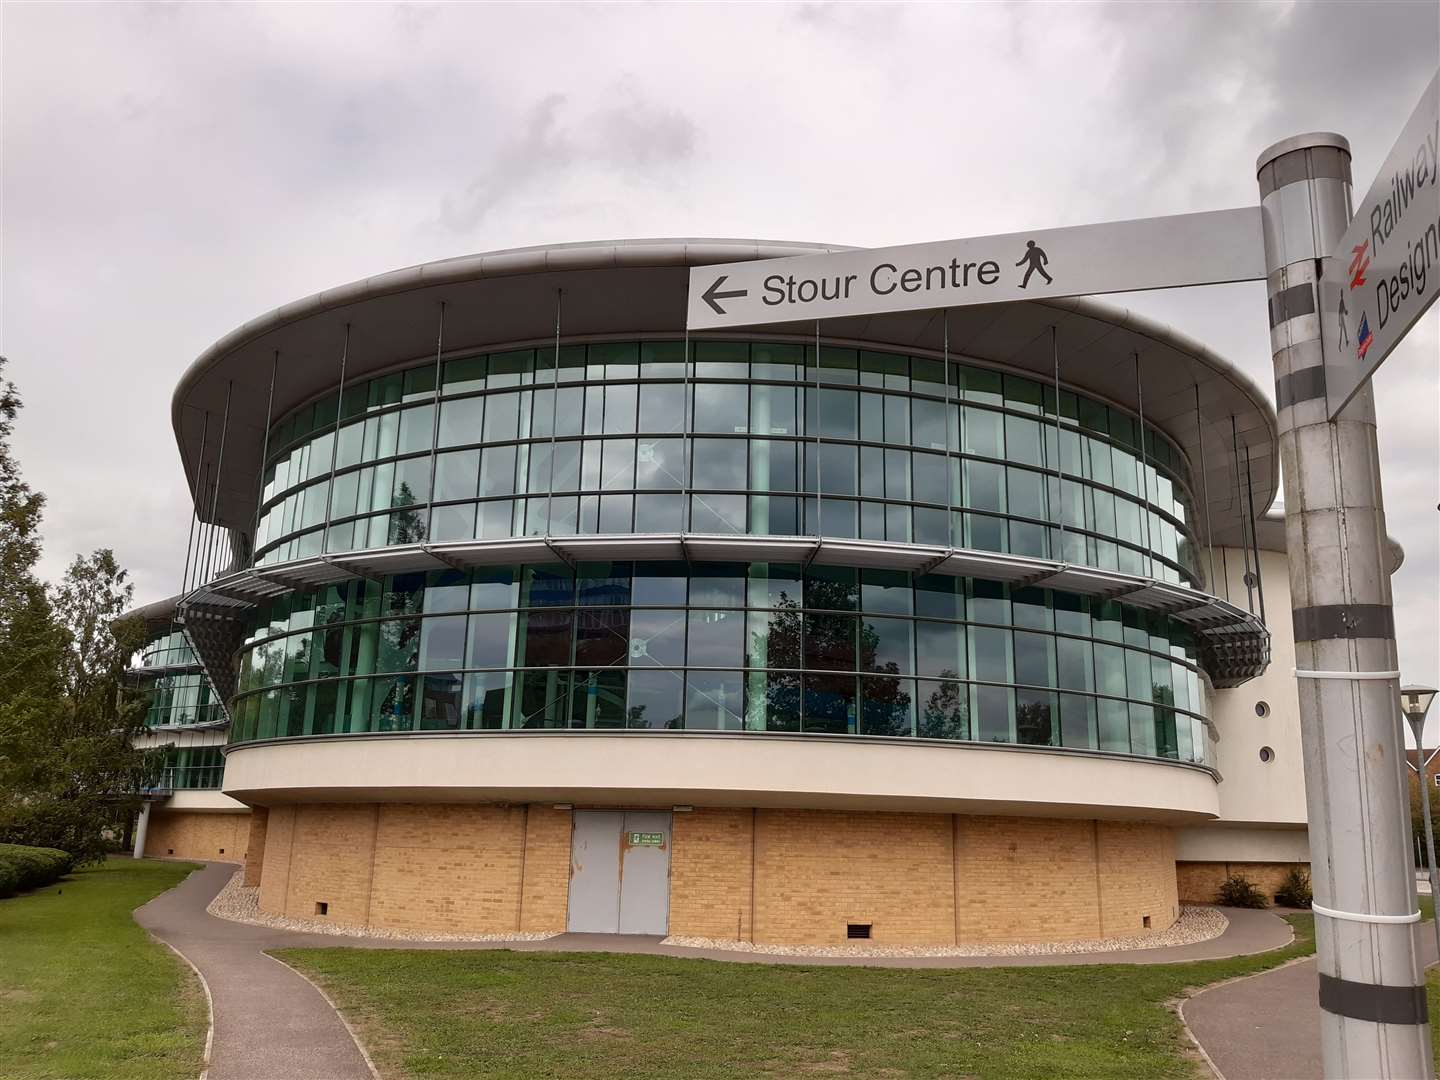 The Stour Centre in Ashford will receive more than £200,000 from the government to help keep the facility open